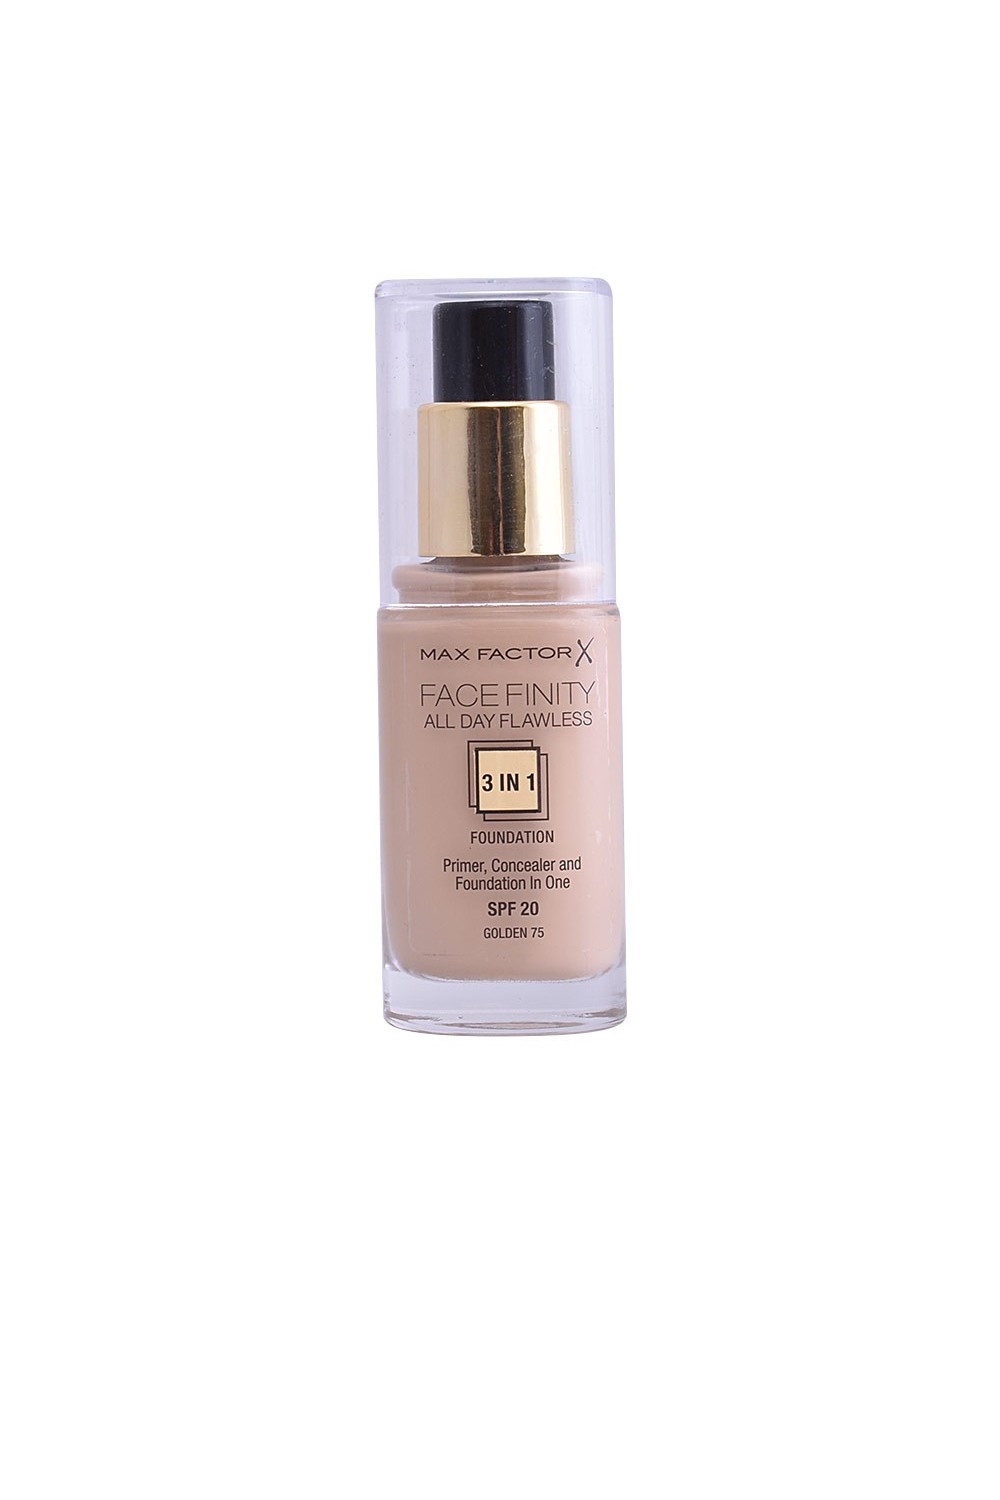 Max Factor Facefinity 3 In 1 Primer, Concealer And Foundation Spf20 75 Golden 30ml